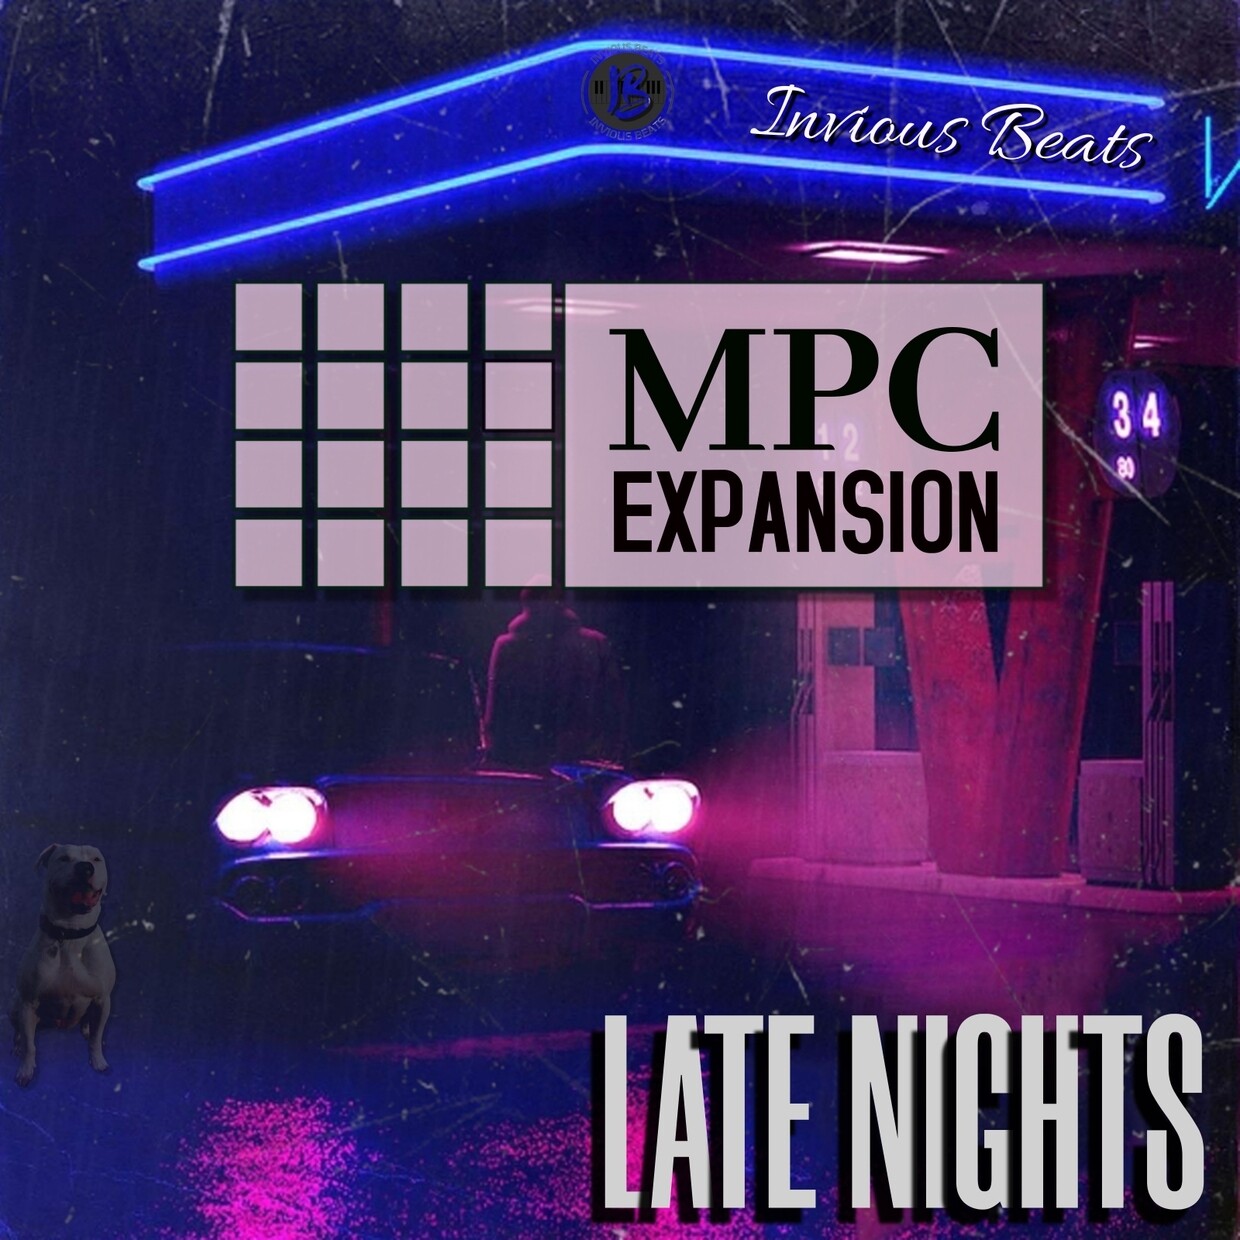 MPC EXPANSION 'LATE NIGHTS' by INVIOUS